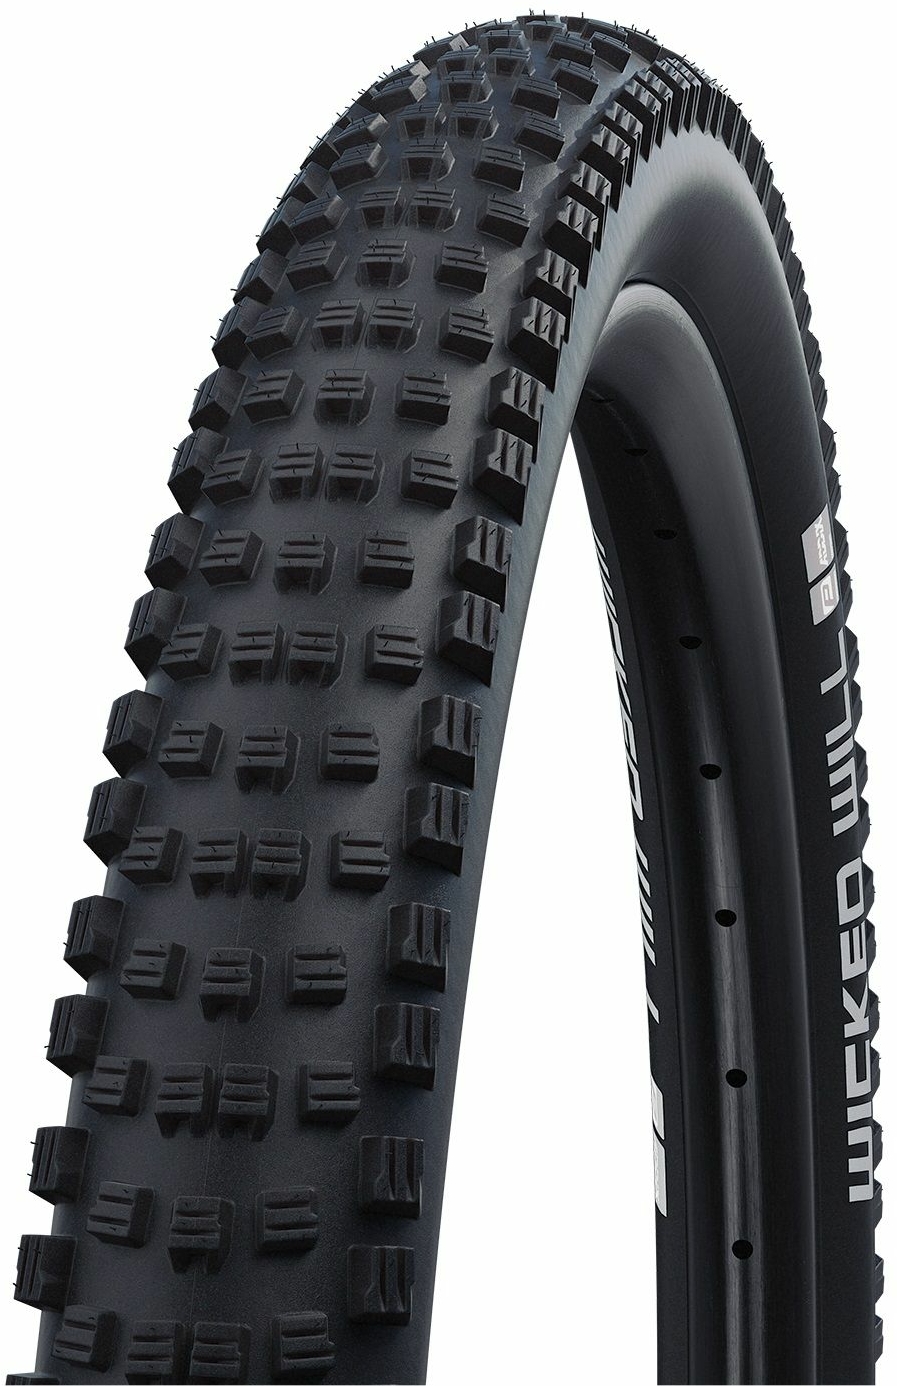 Fahrradteile/Bereifung: Schwalbe  R 614 Wicked Will pl ss fal 62-622 Wicked Will HS 614 